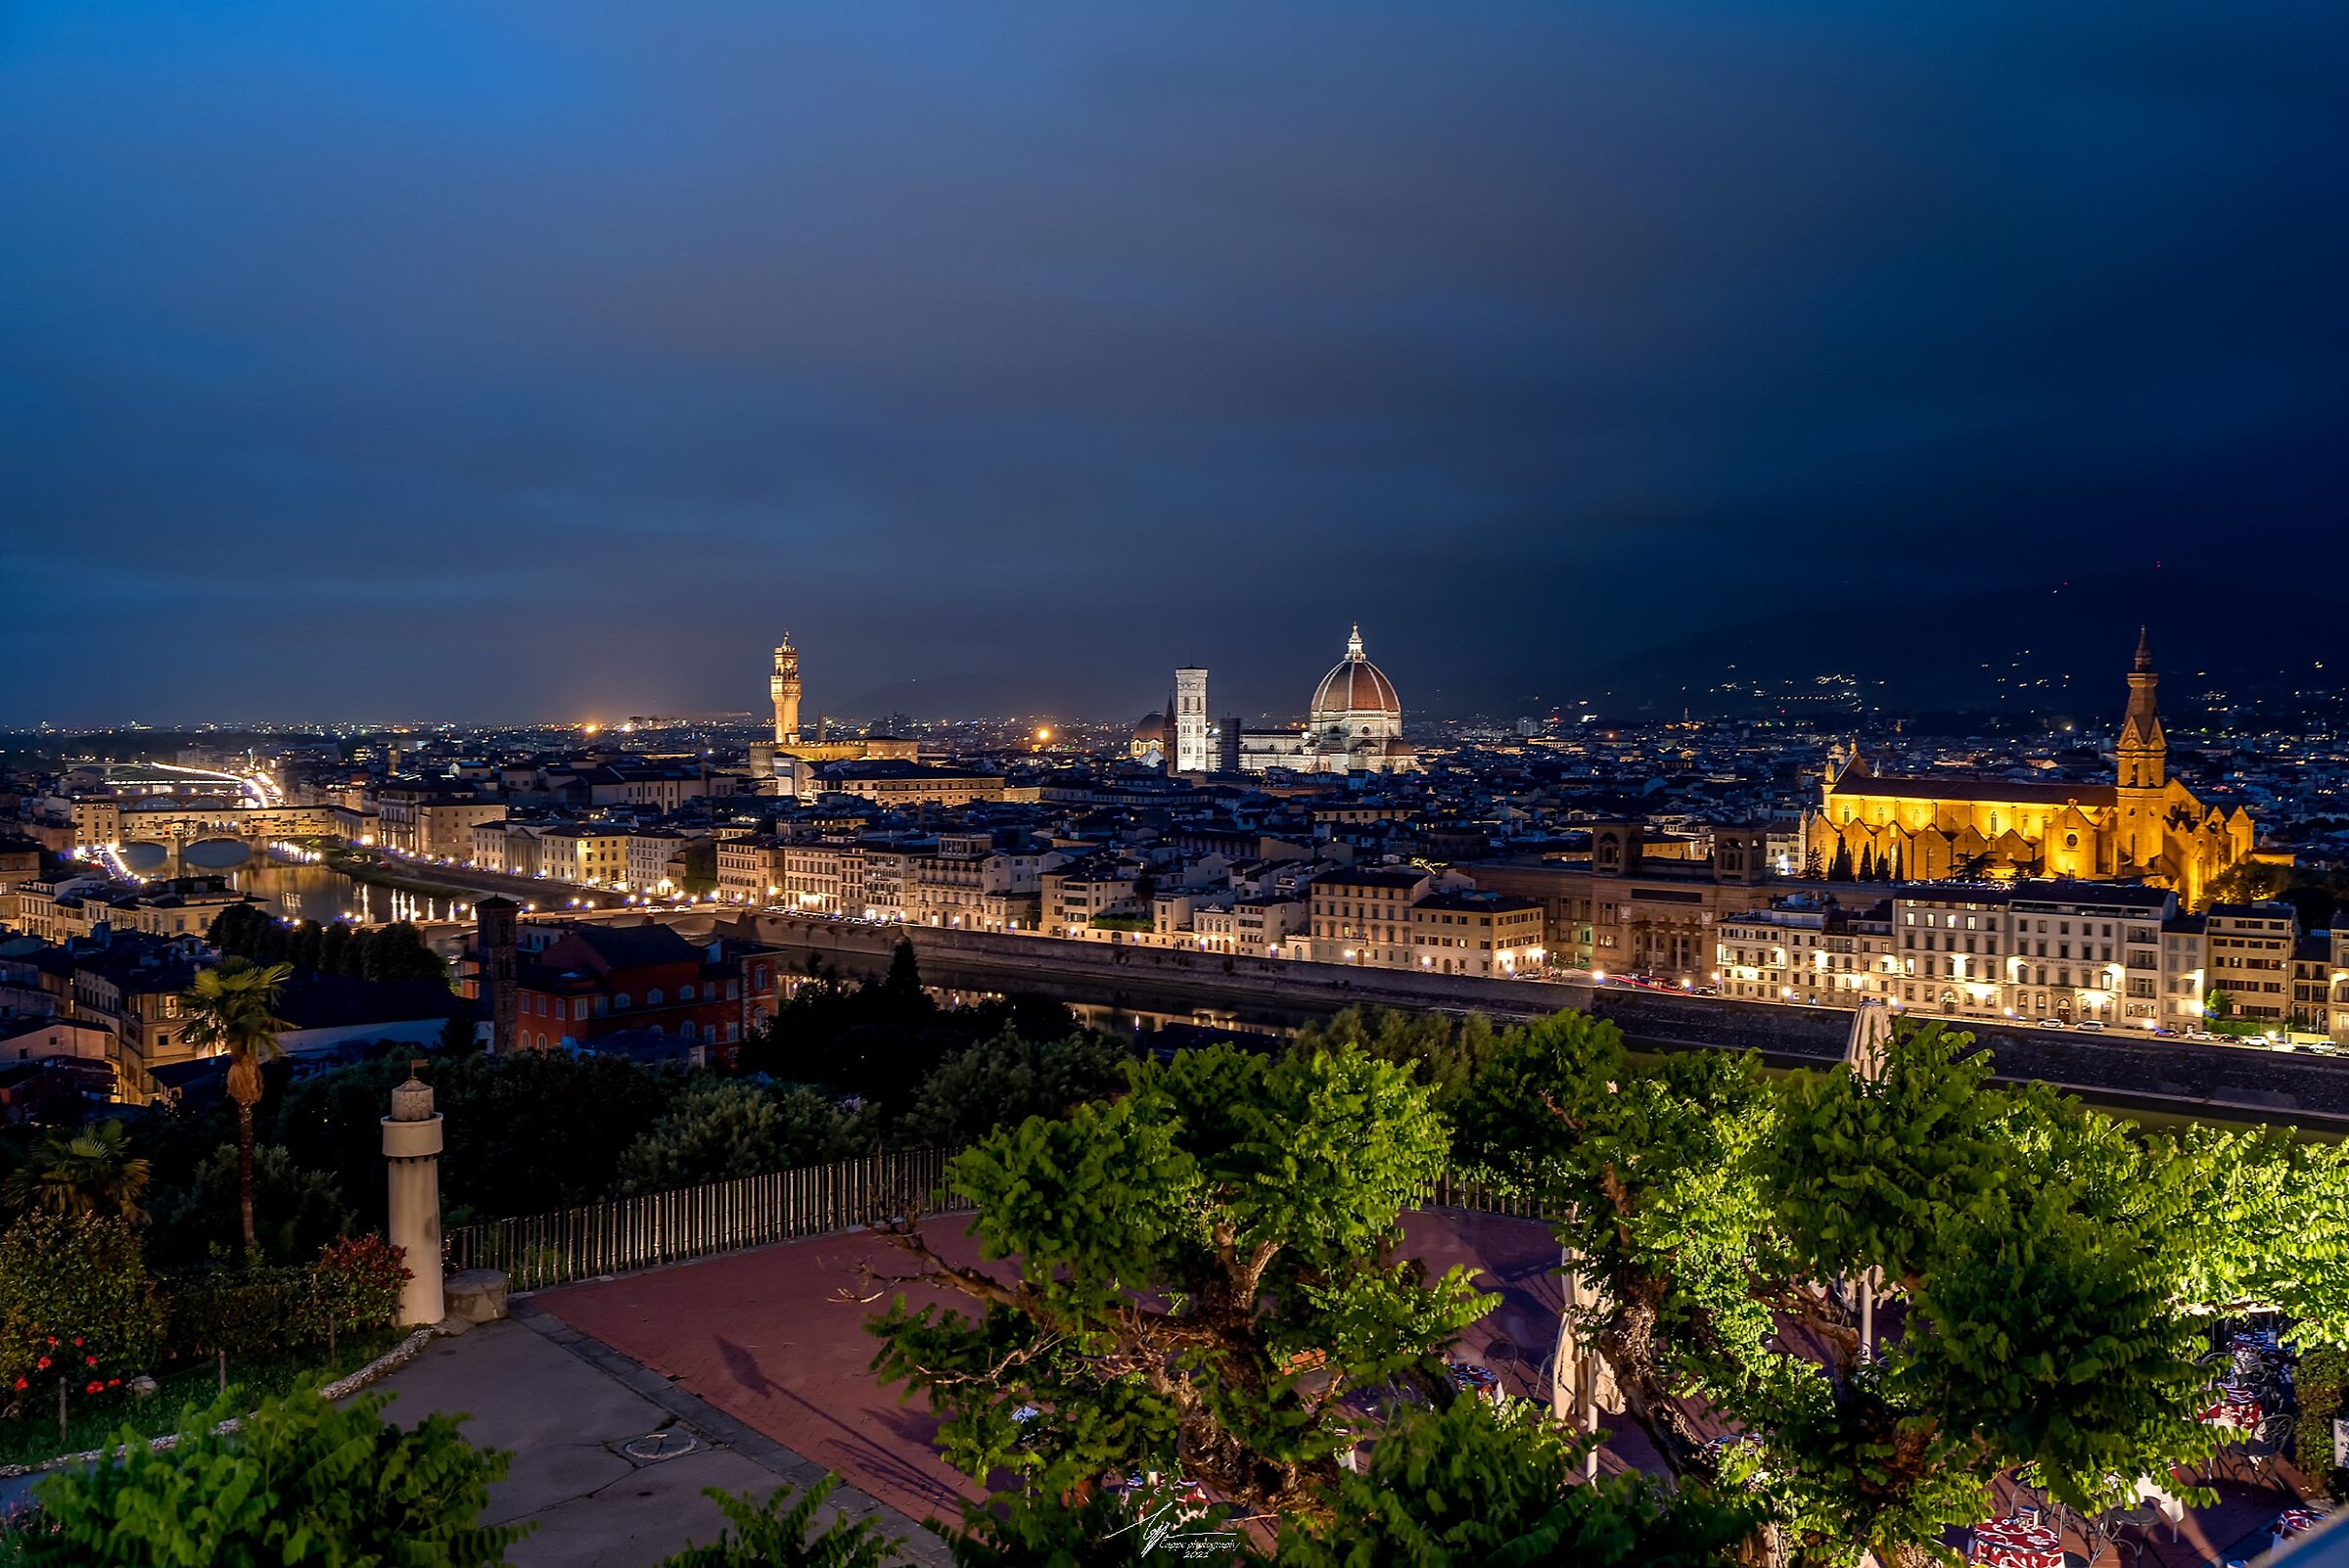 Florence seen at night from Piazzale Michelangelo...